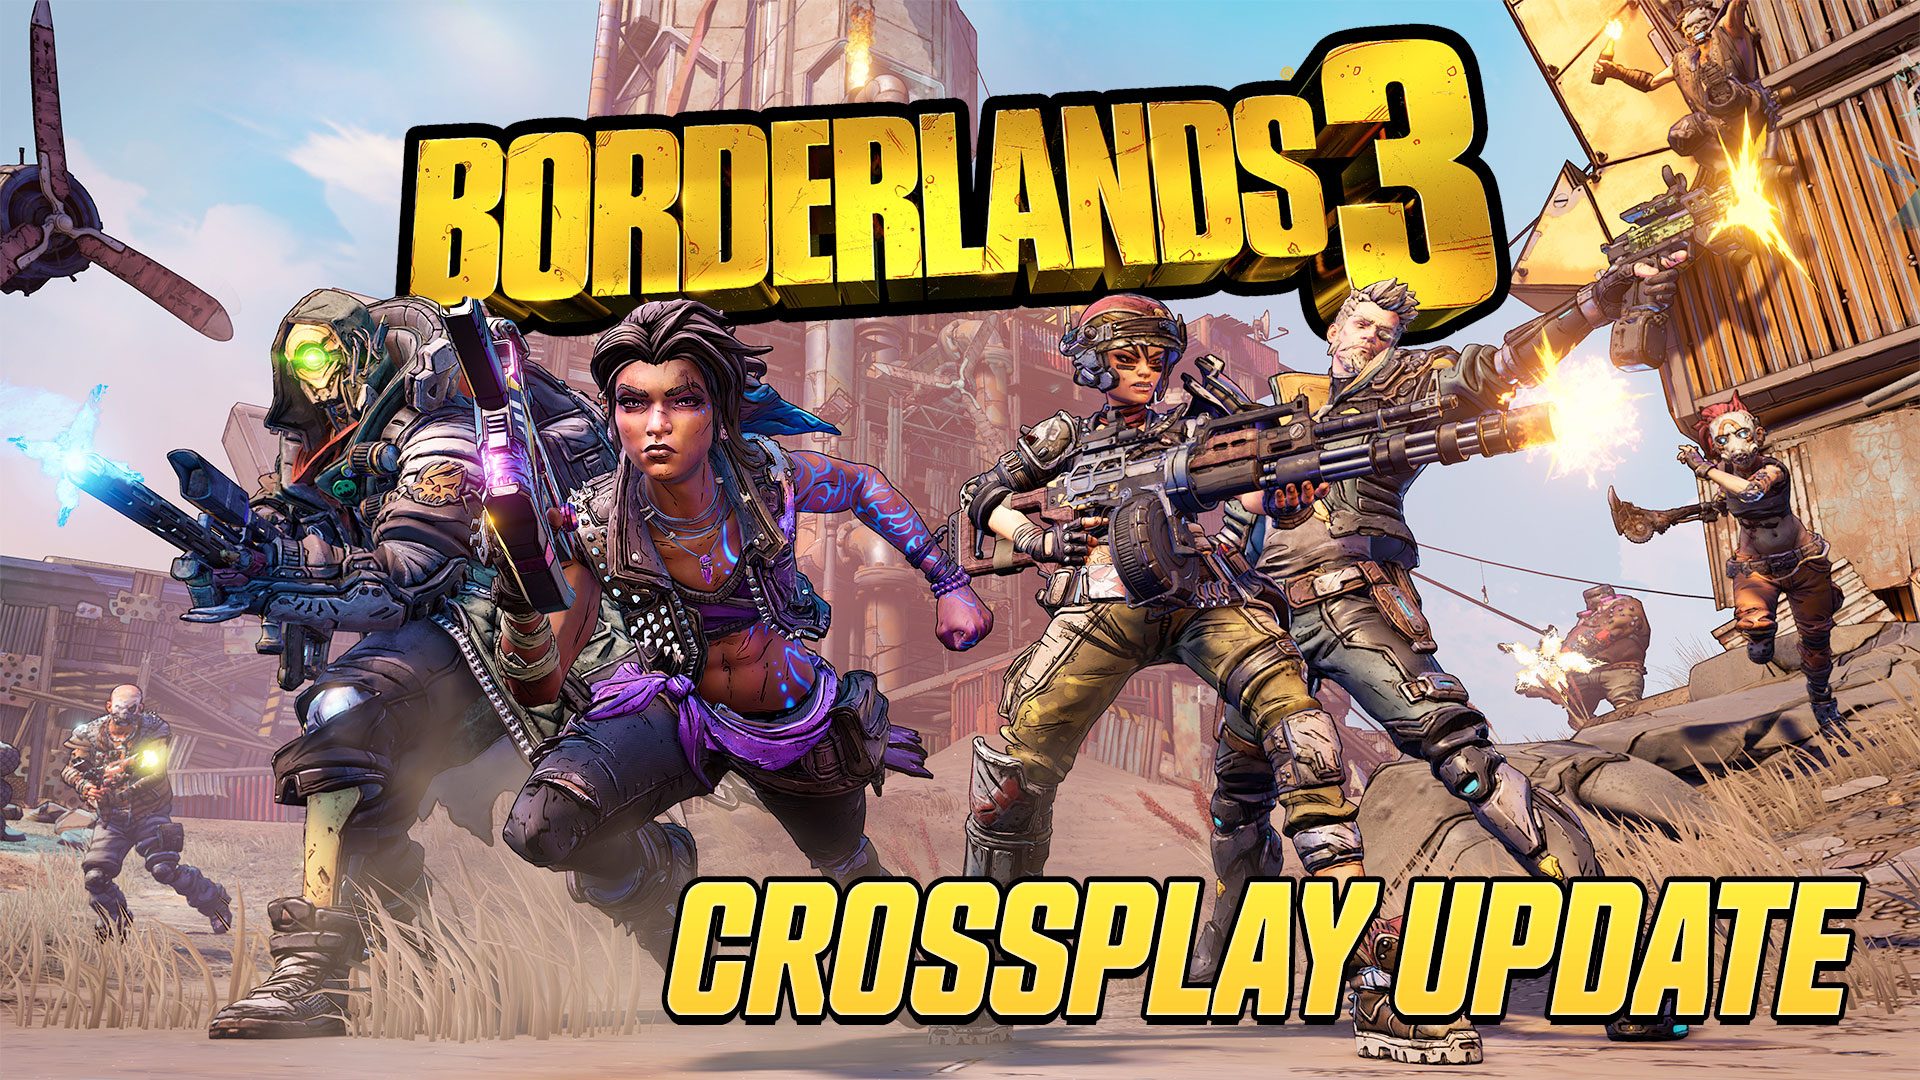 New Borderlands 3 Update - Crossplay, Level Cap Increase, And More ...